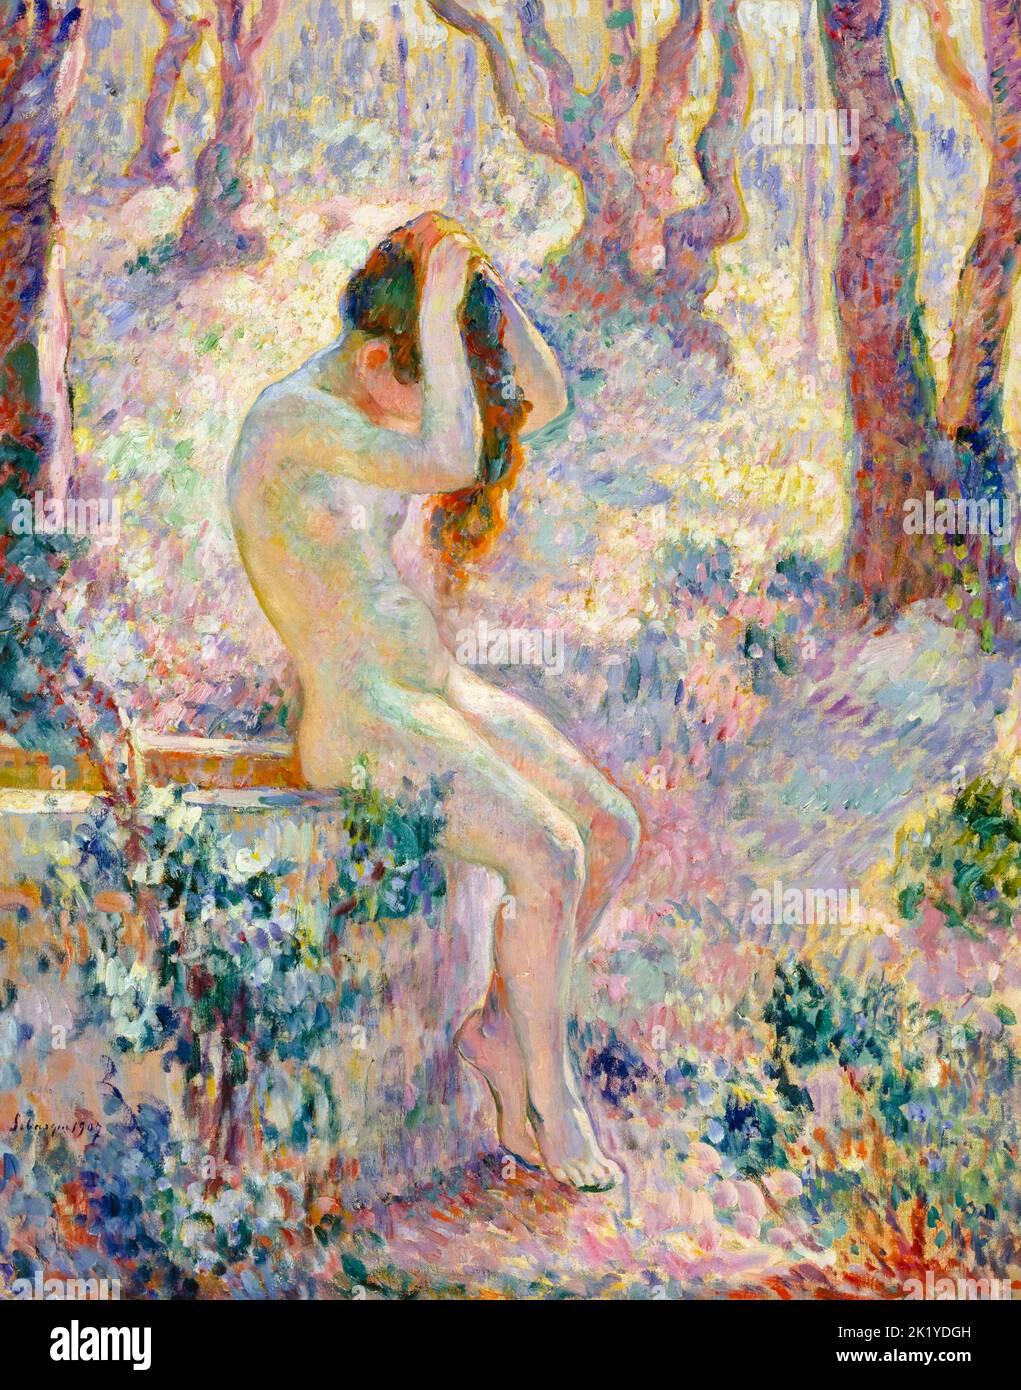 Henri Lebasque, Young Nude Seated on the Edge of a Well, painting in oil on canvas, 1907 Stock Photo